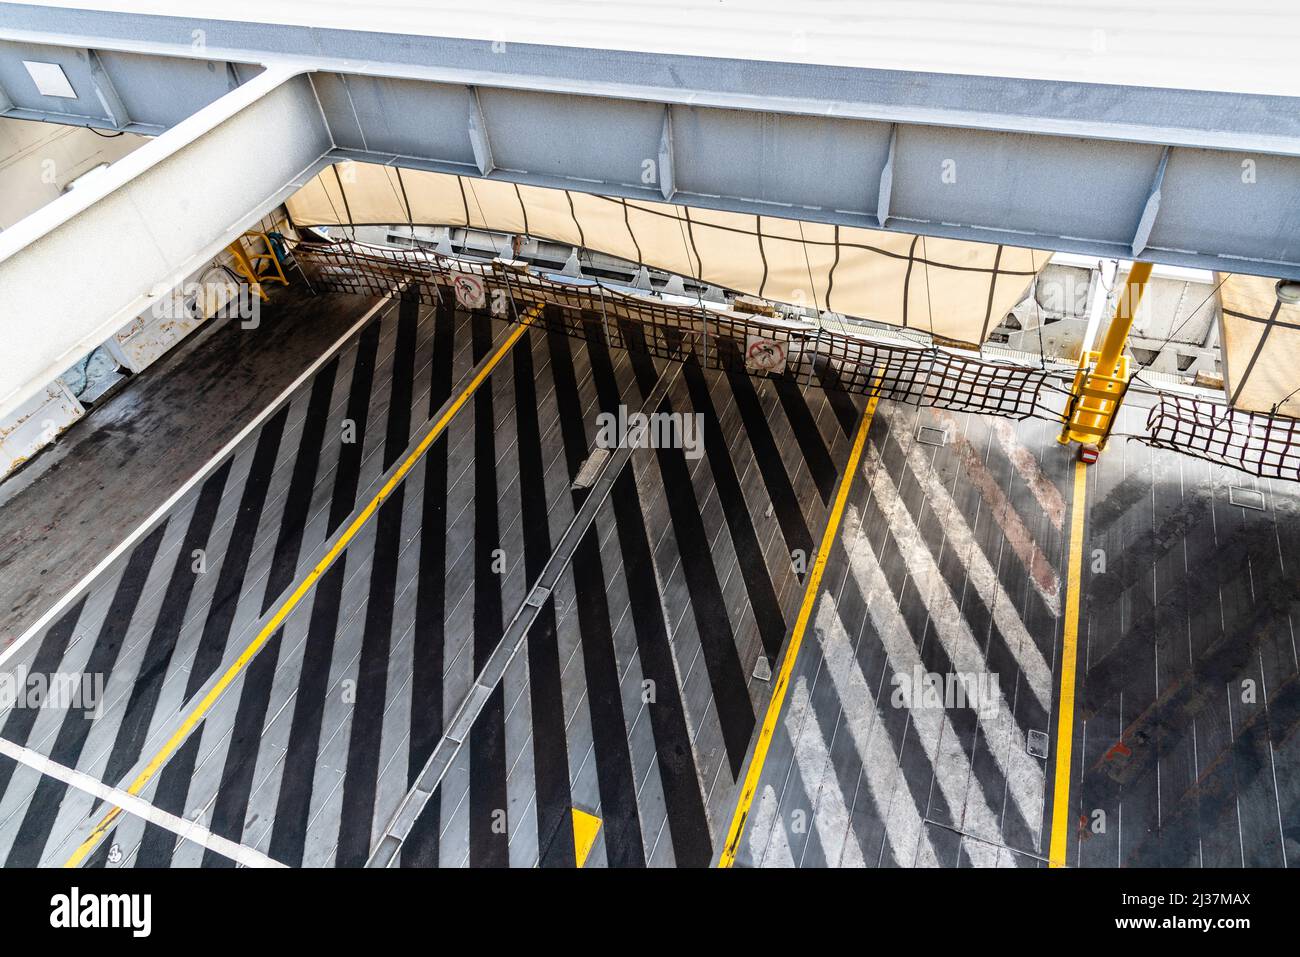 Deck for vehicles of roro ferry. Top view. Stock Photo